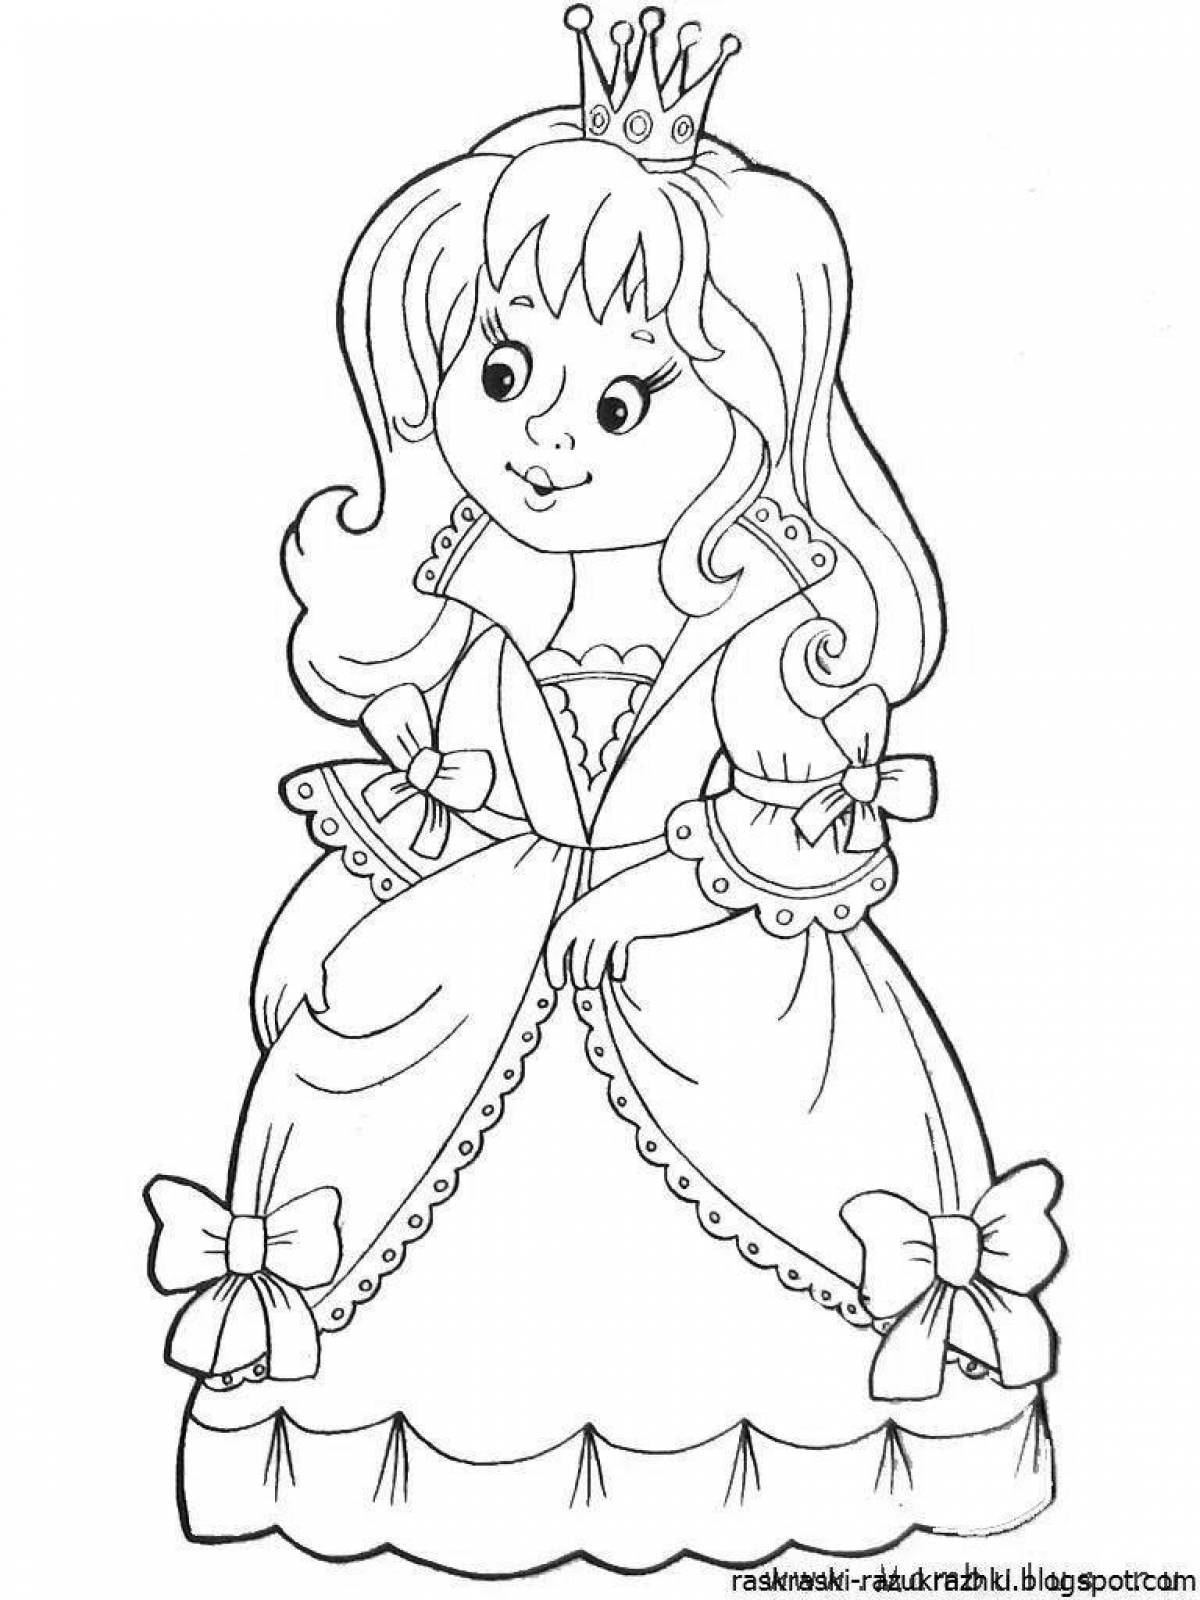 Enticing coloring pages heroes of fairy tales for children